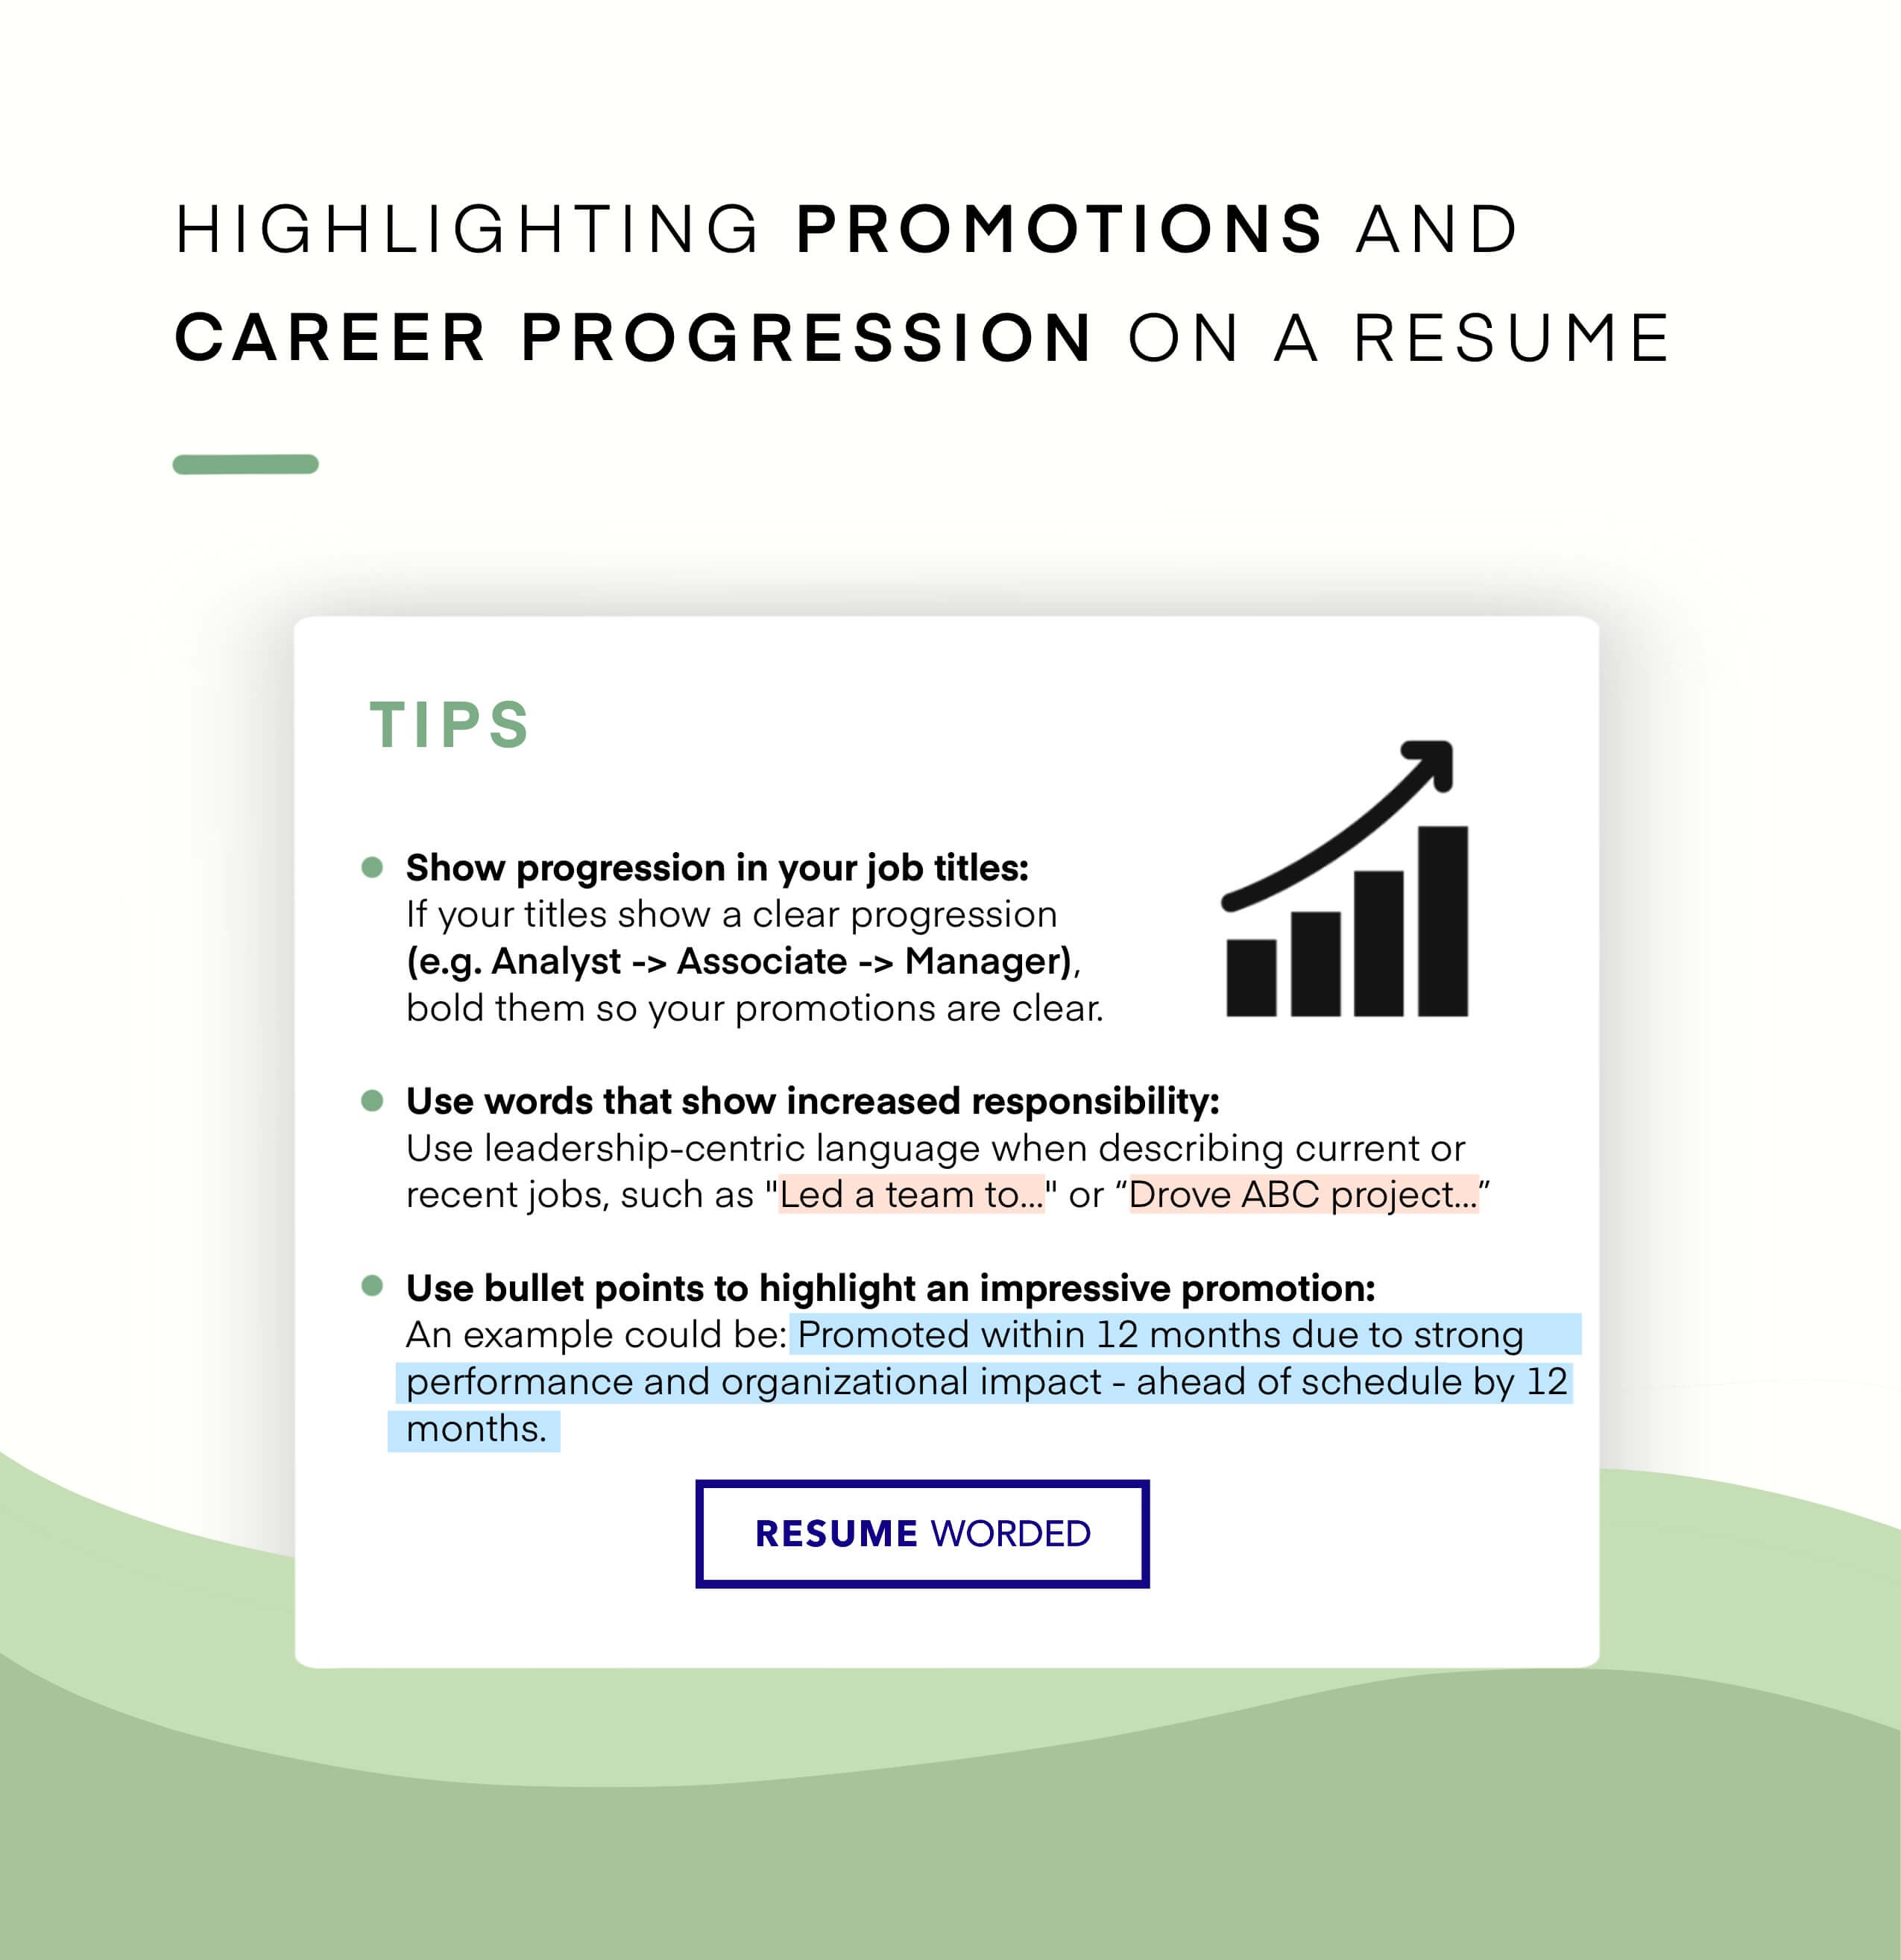 Past promotions are prominently featured - Senior Network Engineer Resume